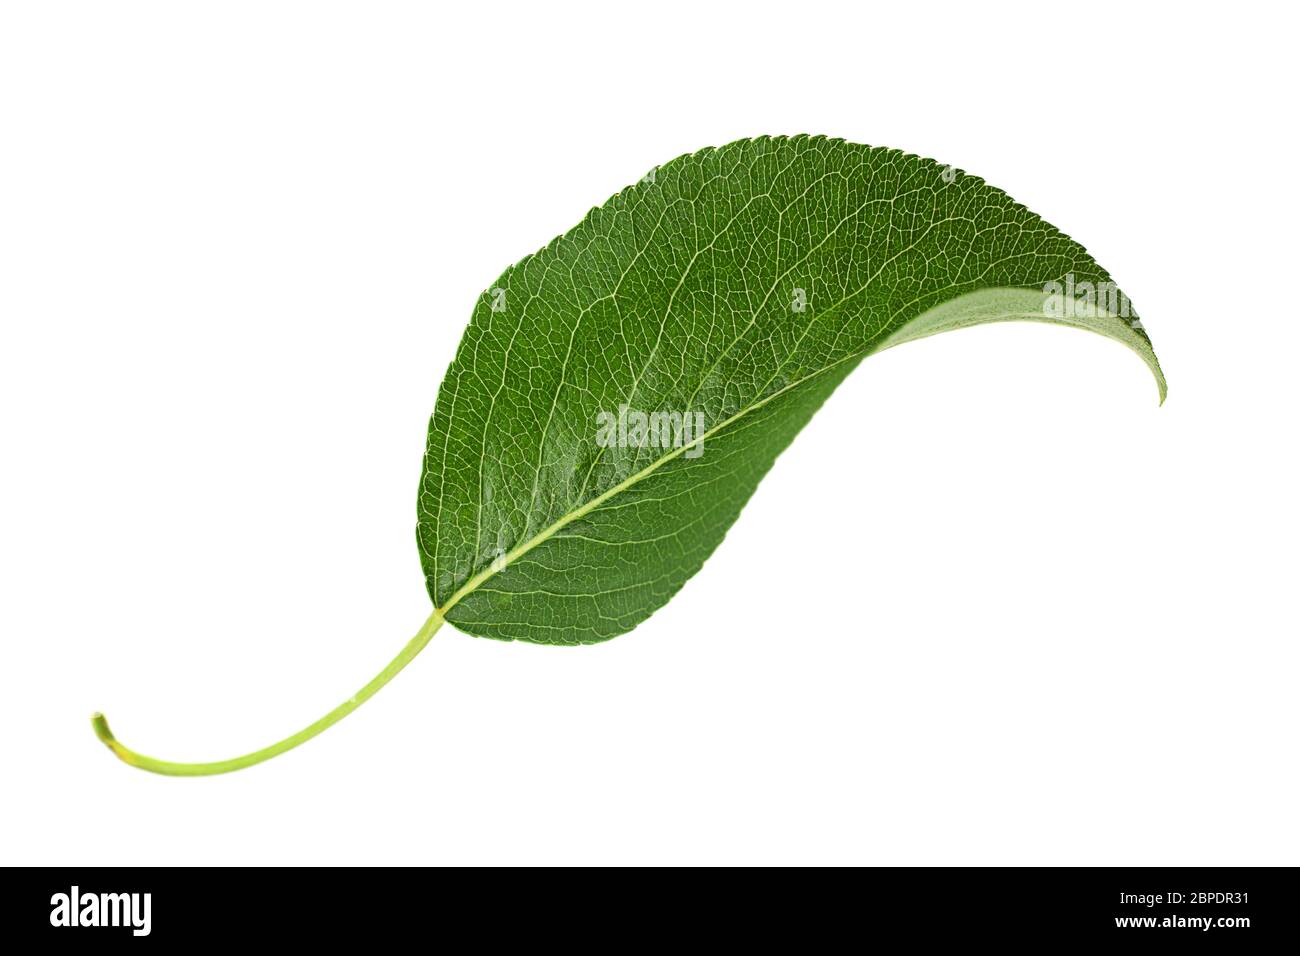 Pear leaf closeup isolated on white background Stock Photo